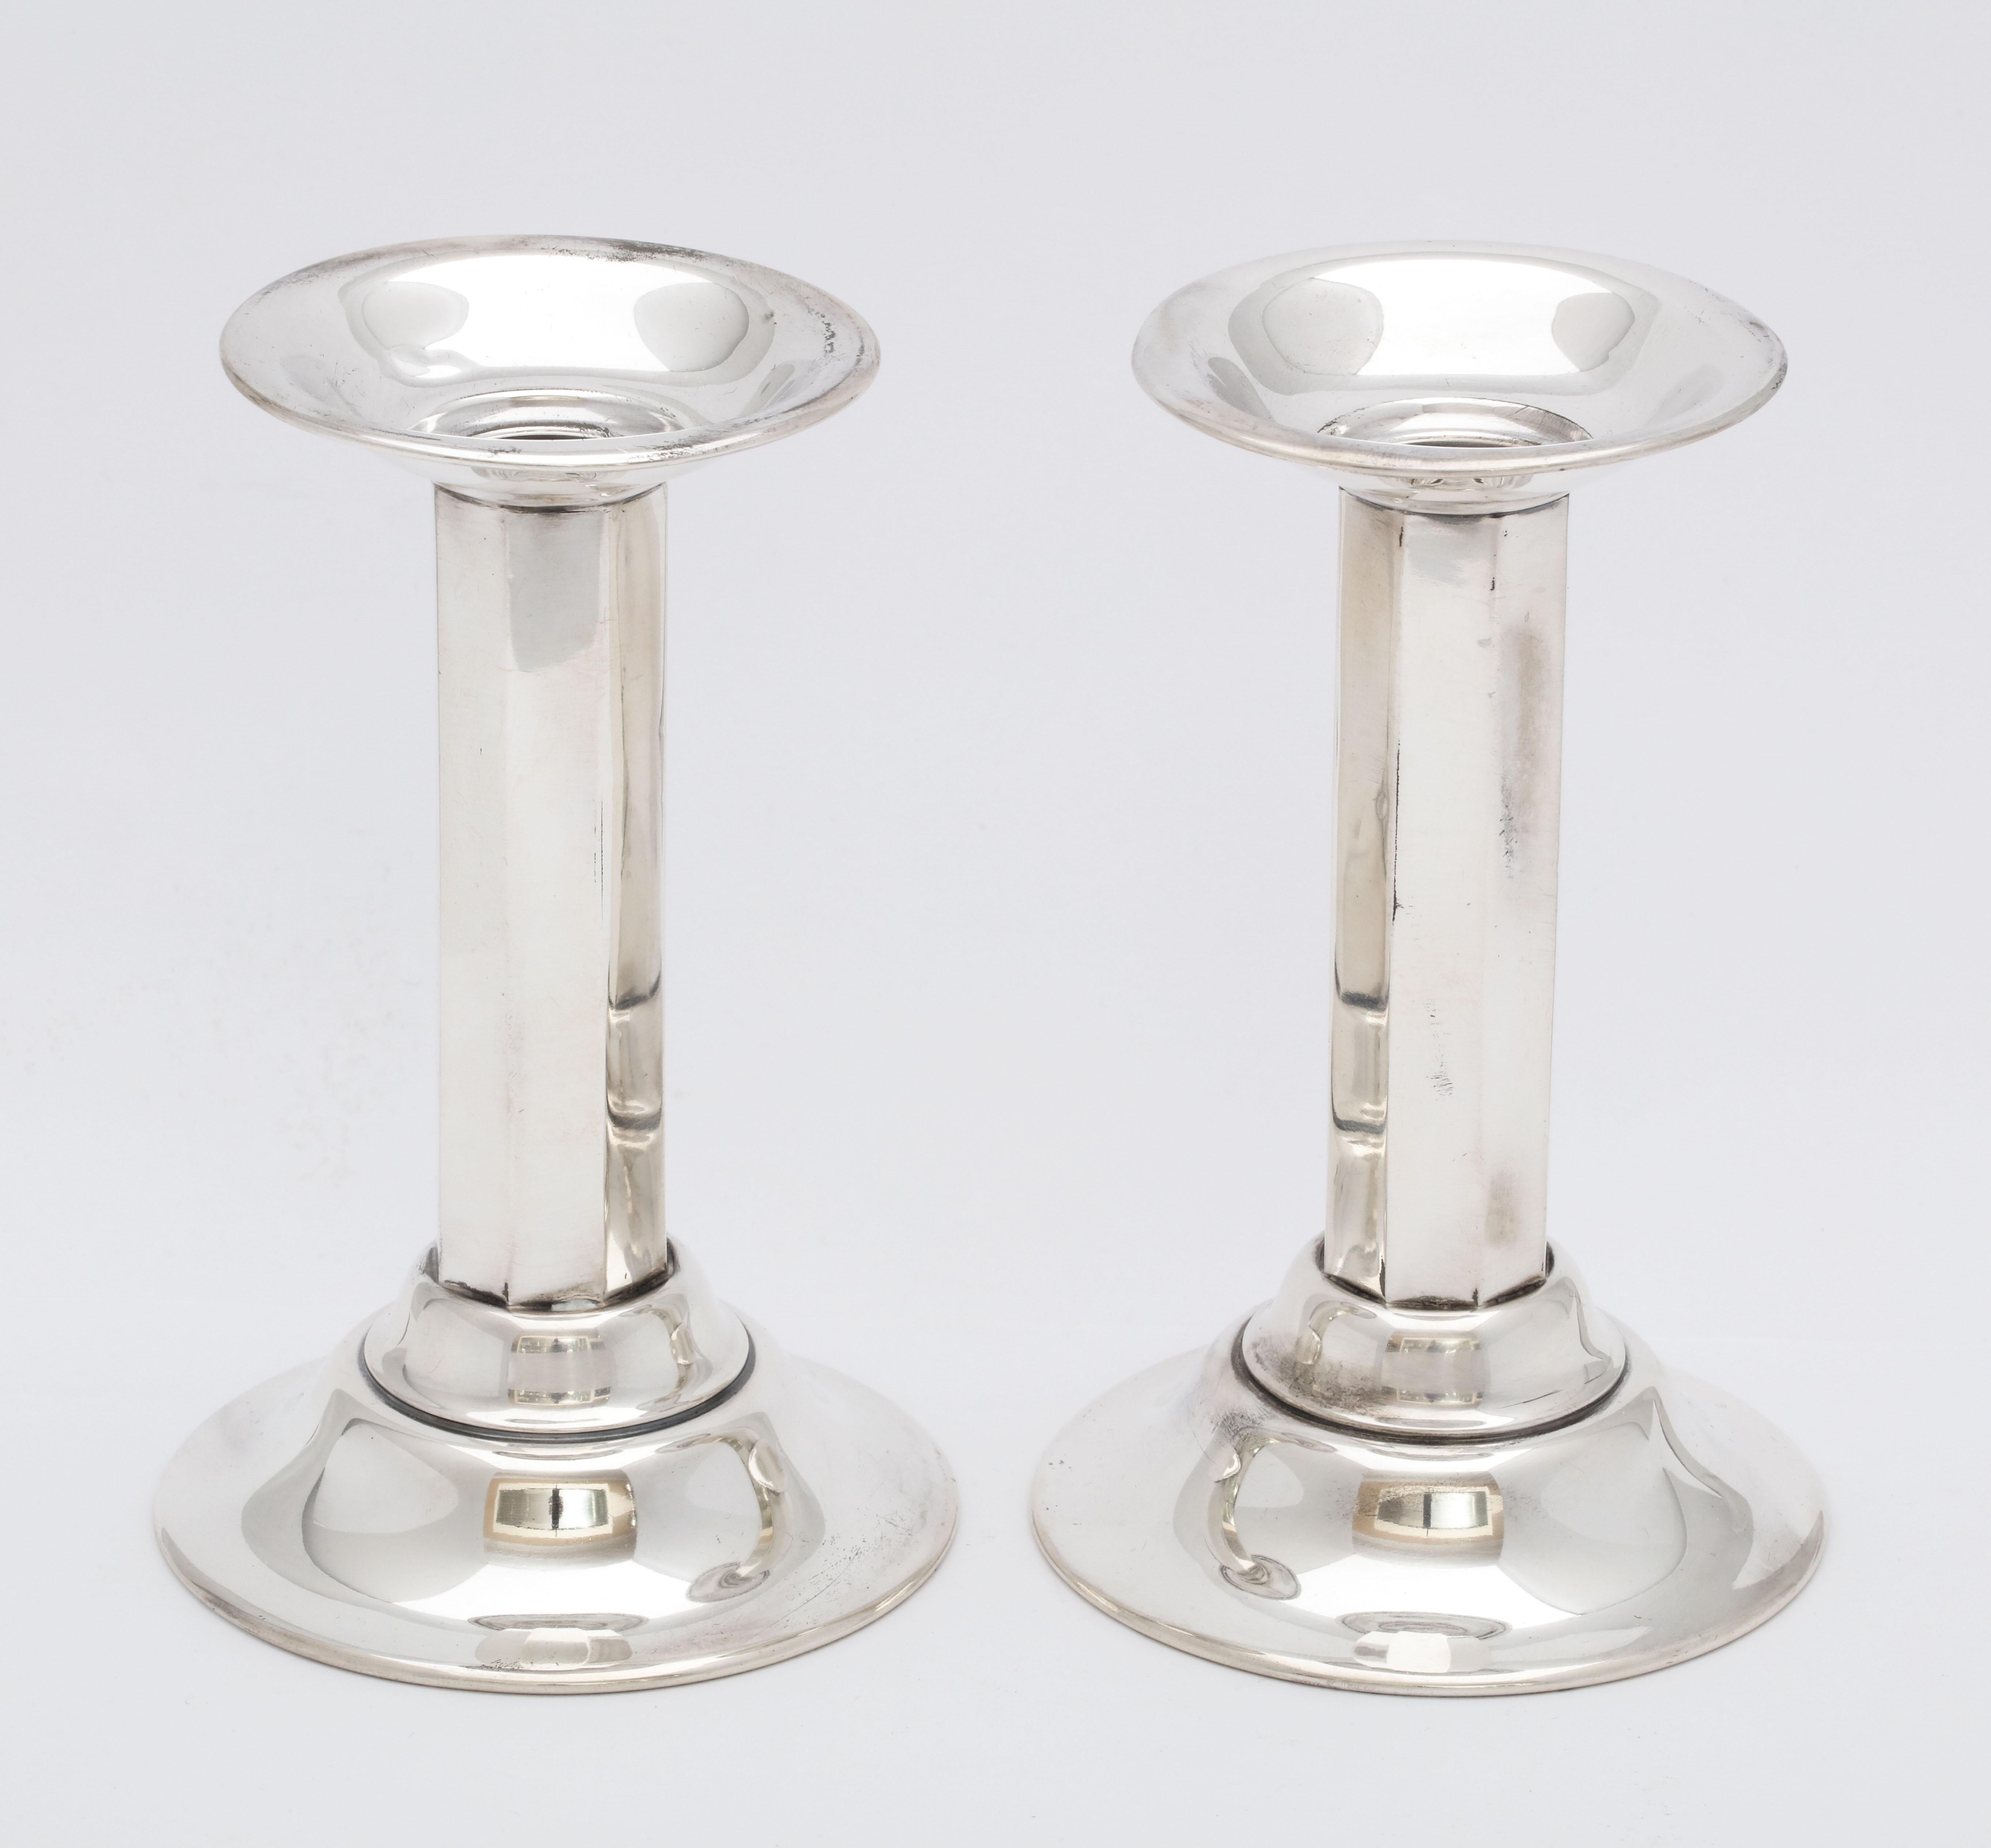 Pair of sterling silver, neoclassical, style, column-form candlesticks, Whiting Mfg. Co., Providence, Rhode Island, year-hallmarked for 1919. Faceted column. Each candlestick measures 5 inches high x 3 1/4 inches in diameter across base. Unweighted.